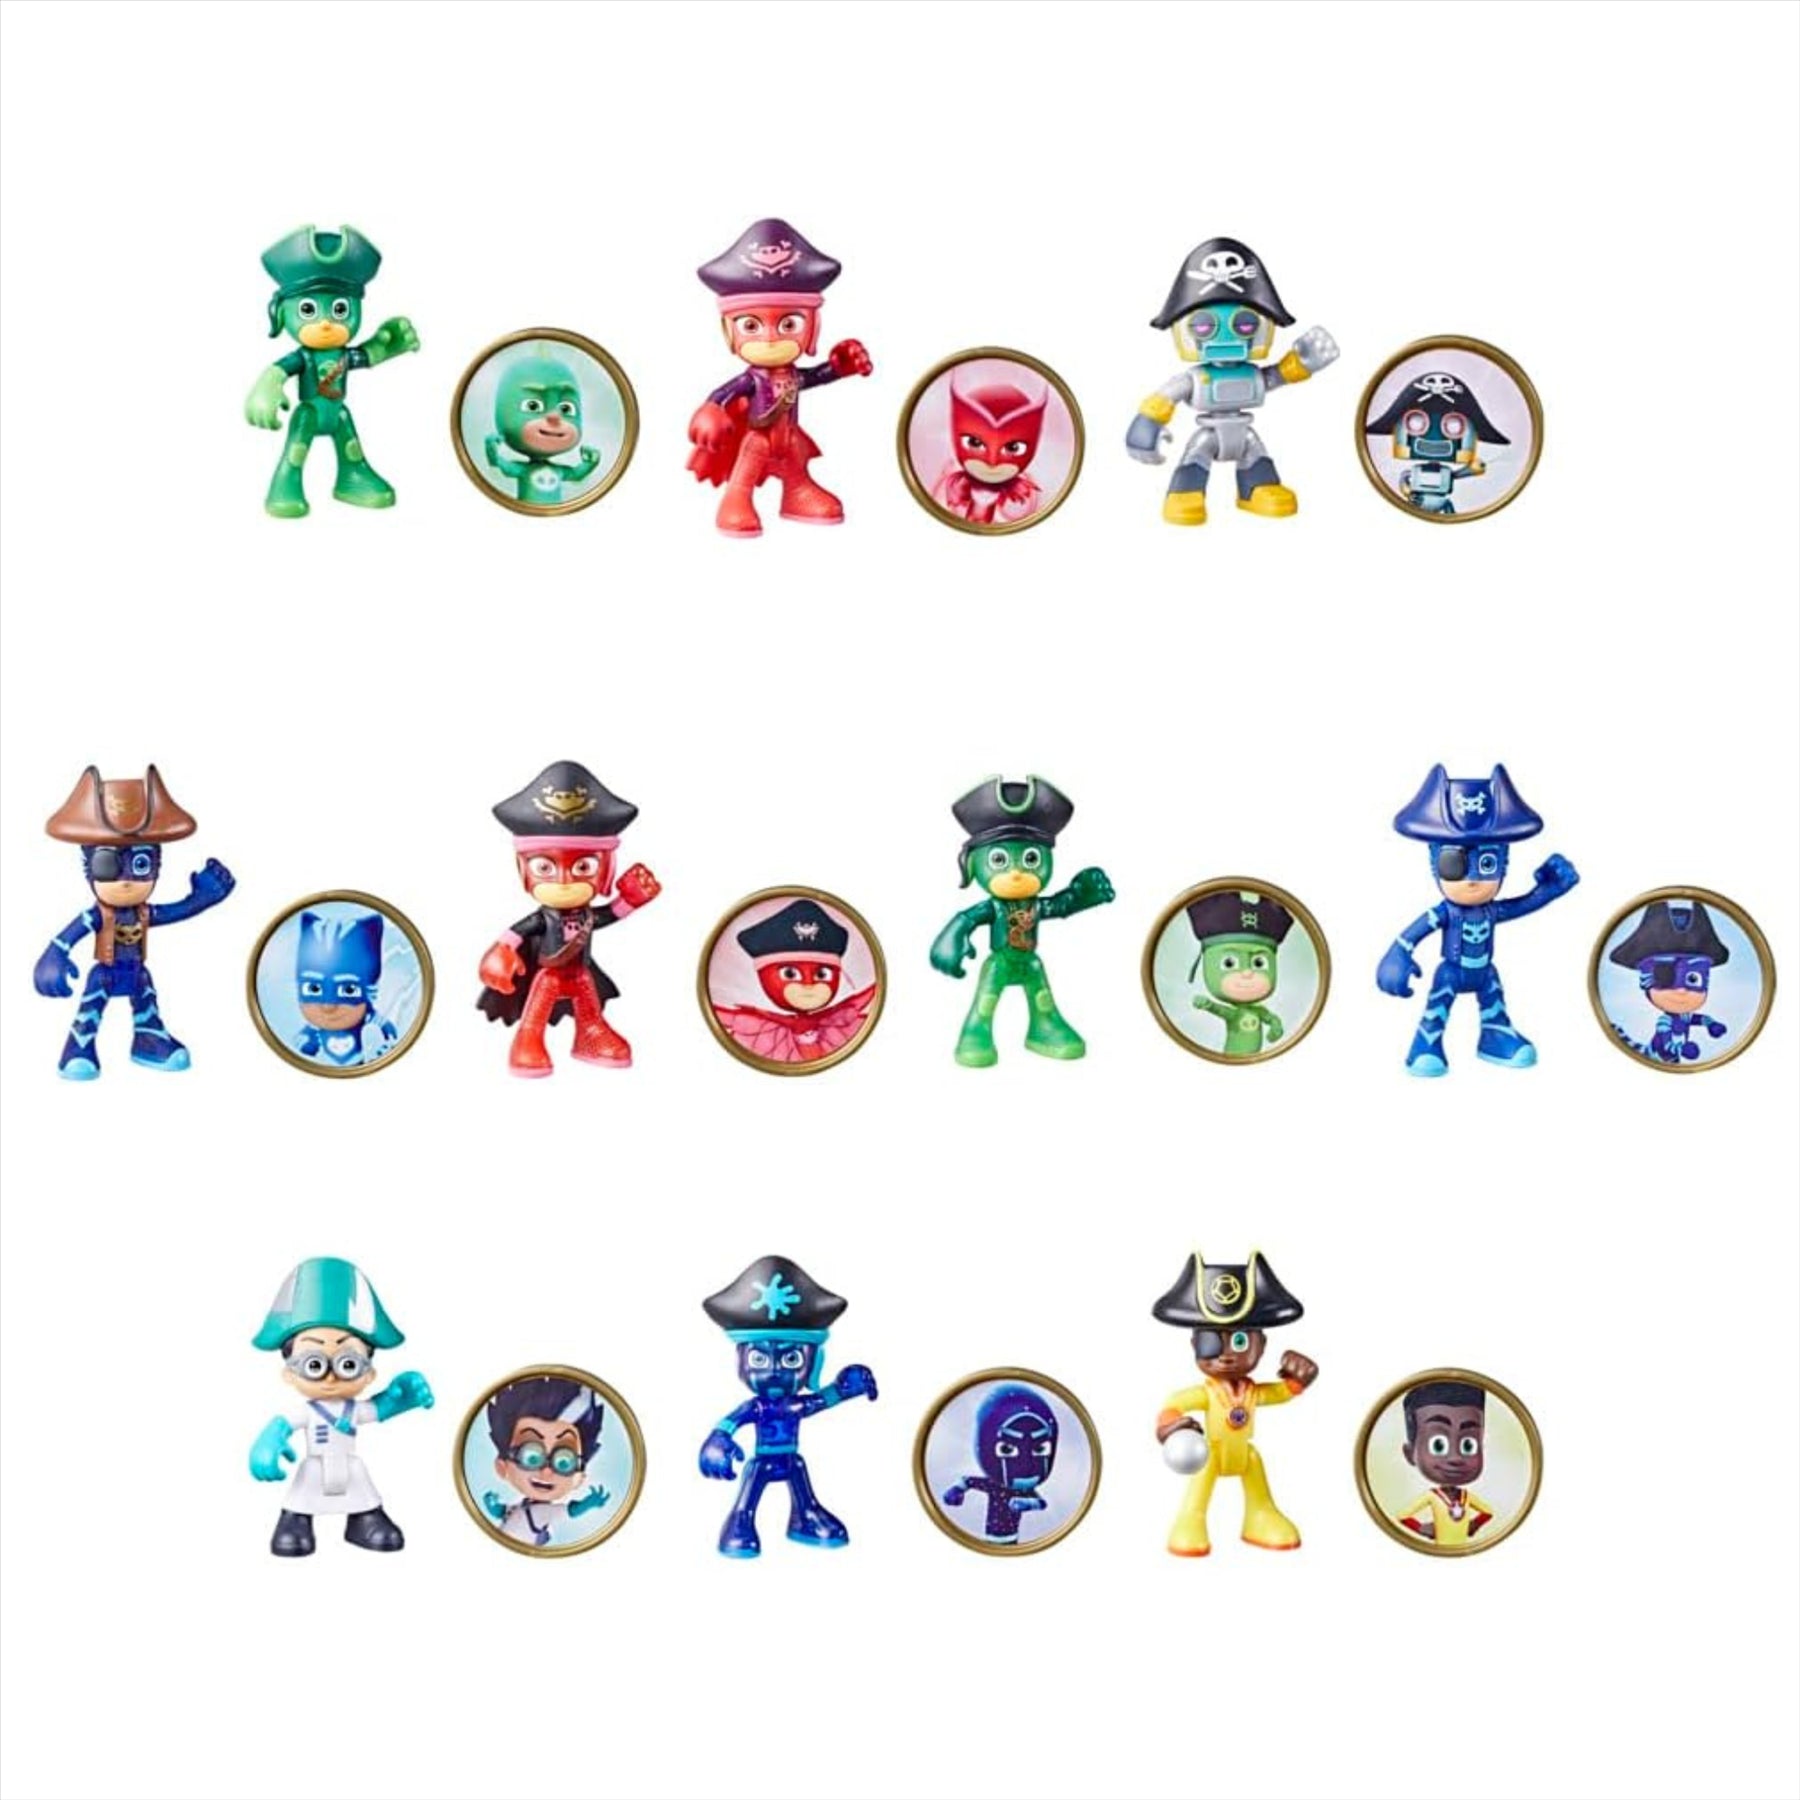 PJ Masks Articulated Play Figures and Accessories Blind Box Sets - 5x Pirate Power Blind Boxes - Toptoys2u